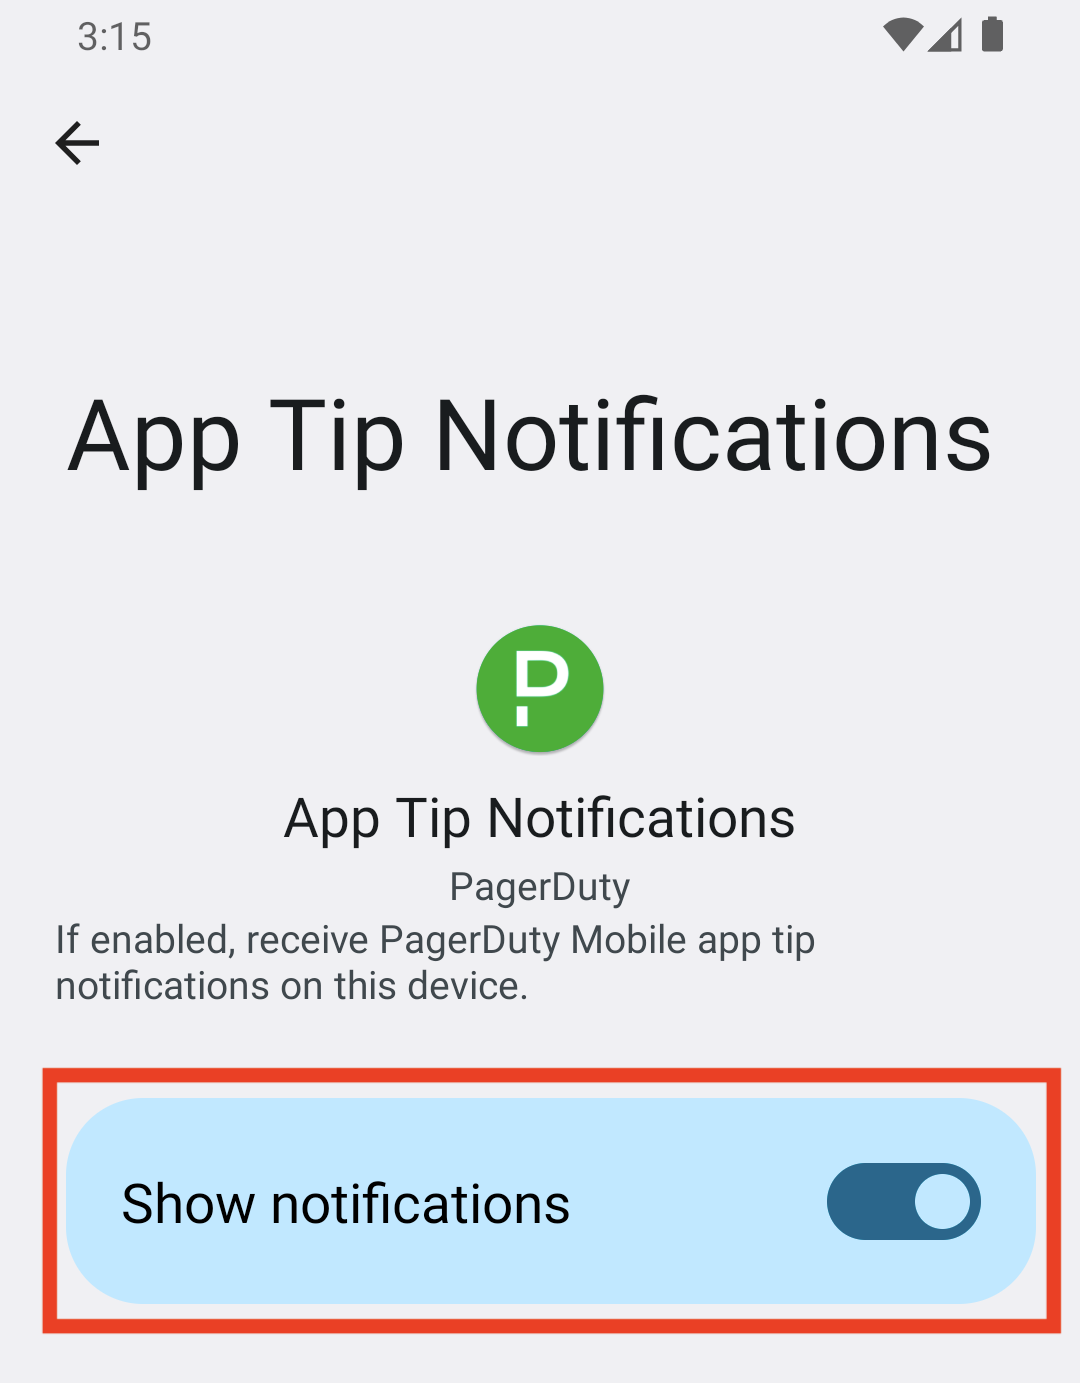 Android: App Tip Notifications toggle